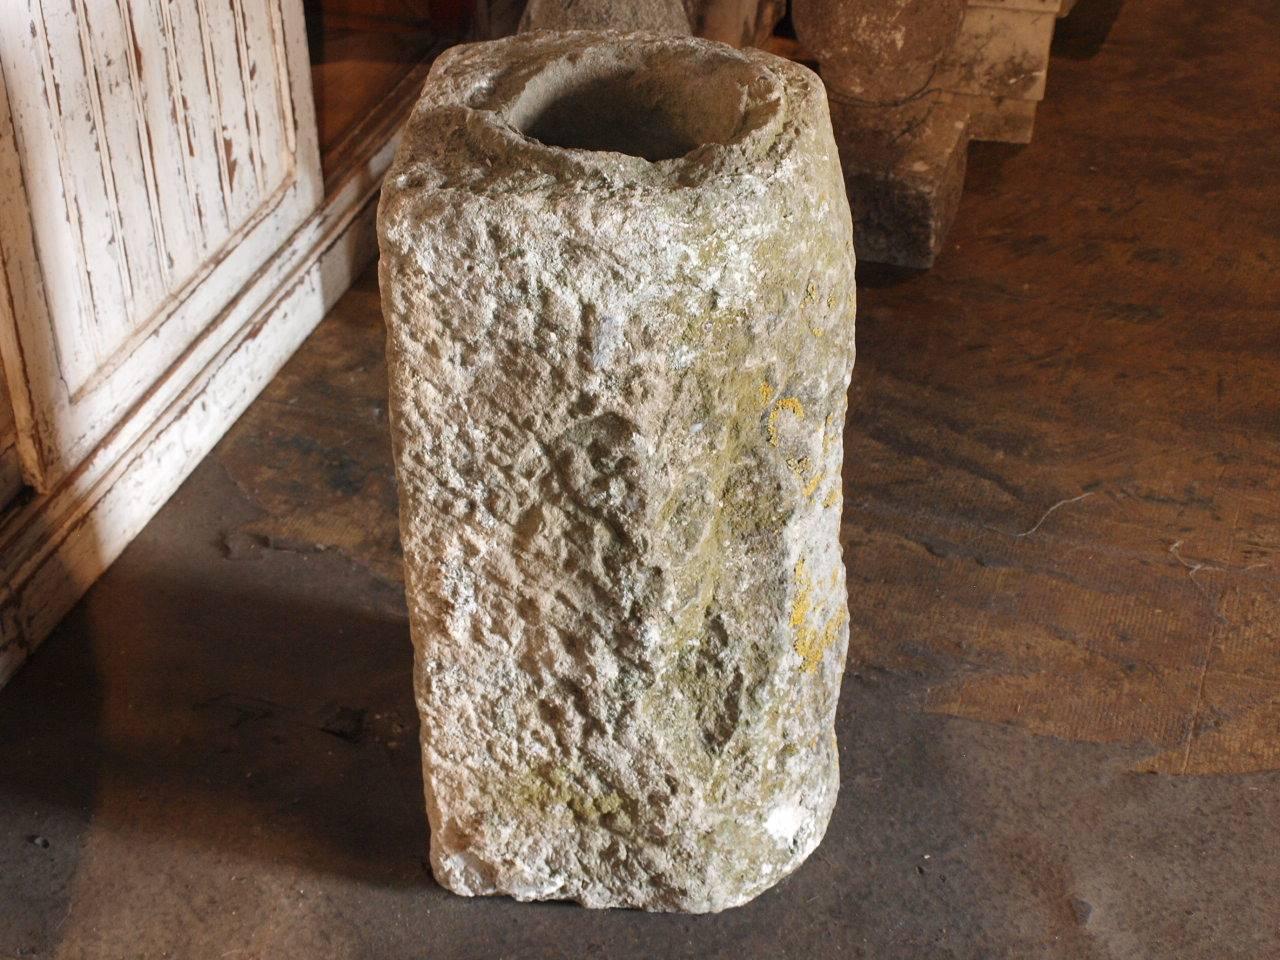 A fantastic Roman aqueduct fragment found in Spain in hand-carved chiselled stone. An incredible architectural element to incorporate into any interior or exterior.